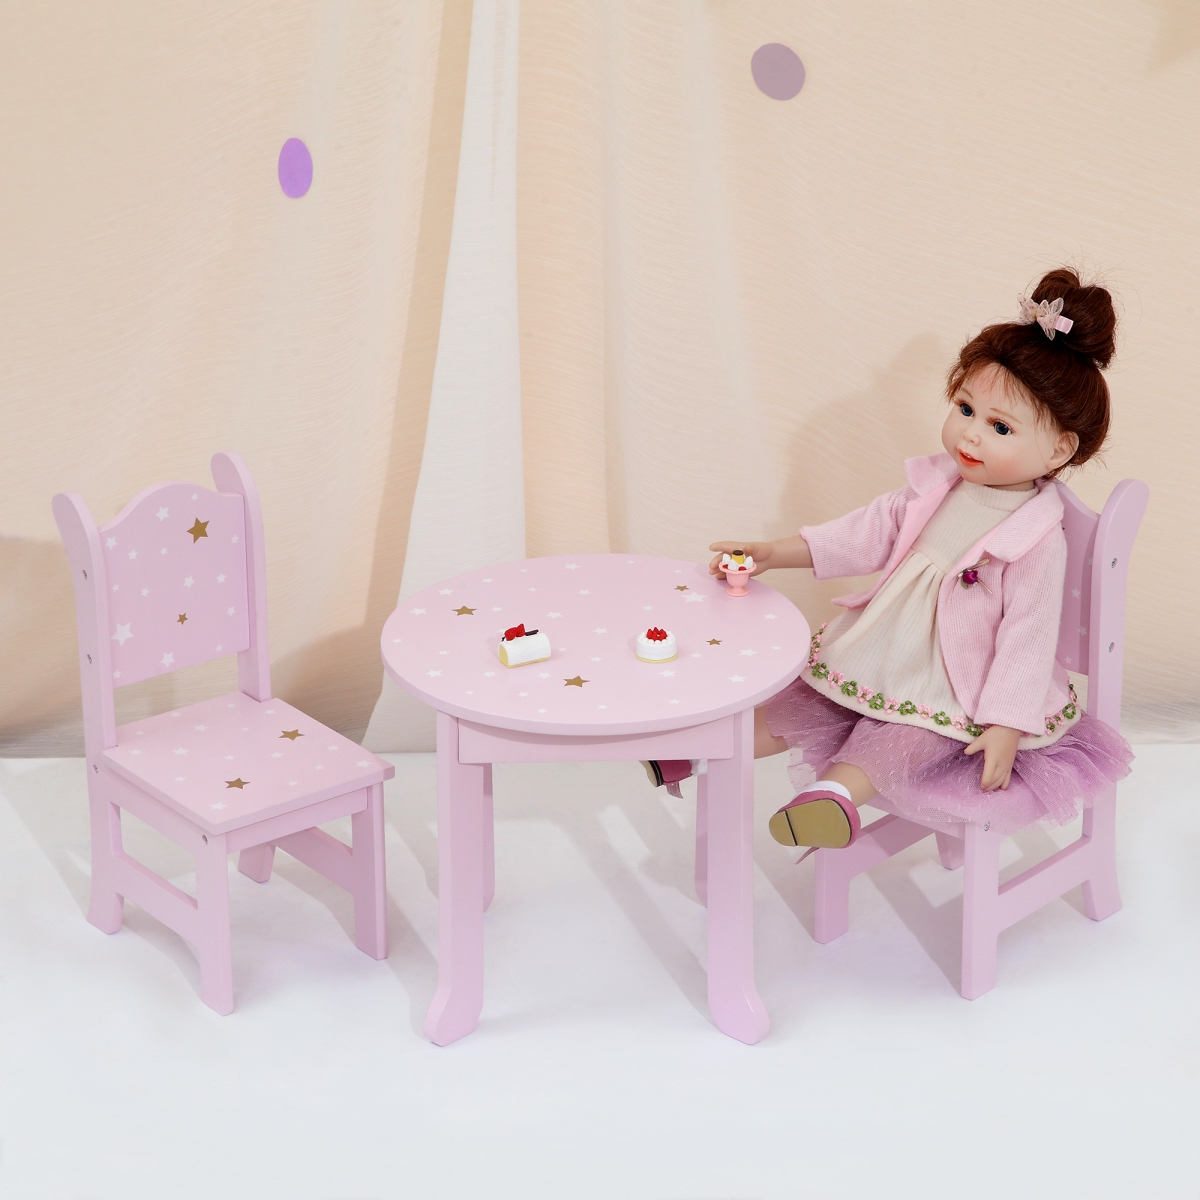 Td-0208ap 18 In. Twinkle Stars Princess Doll Table & 2 Chairs Set, Purple & Gold